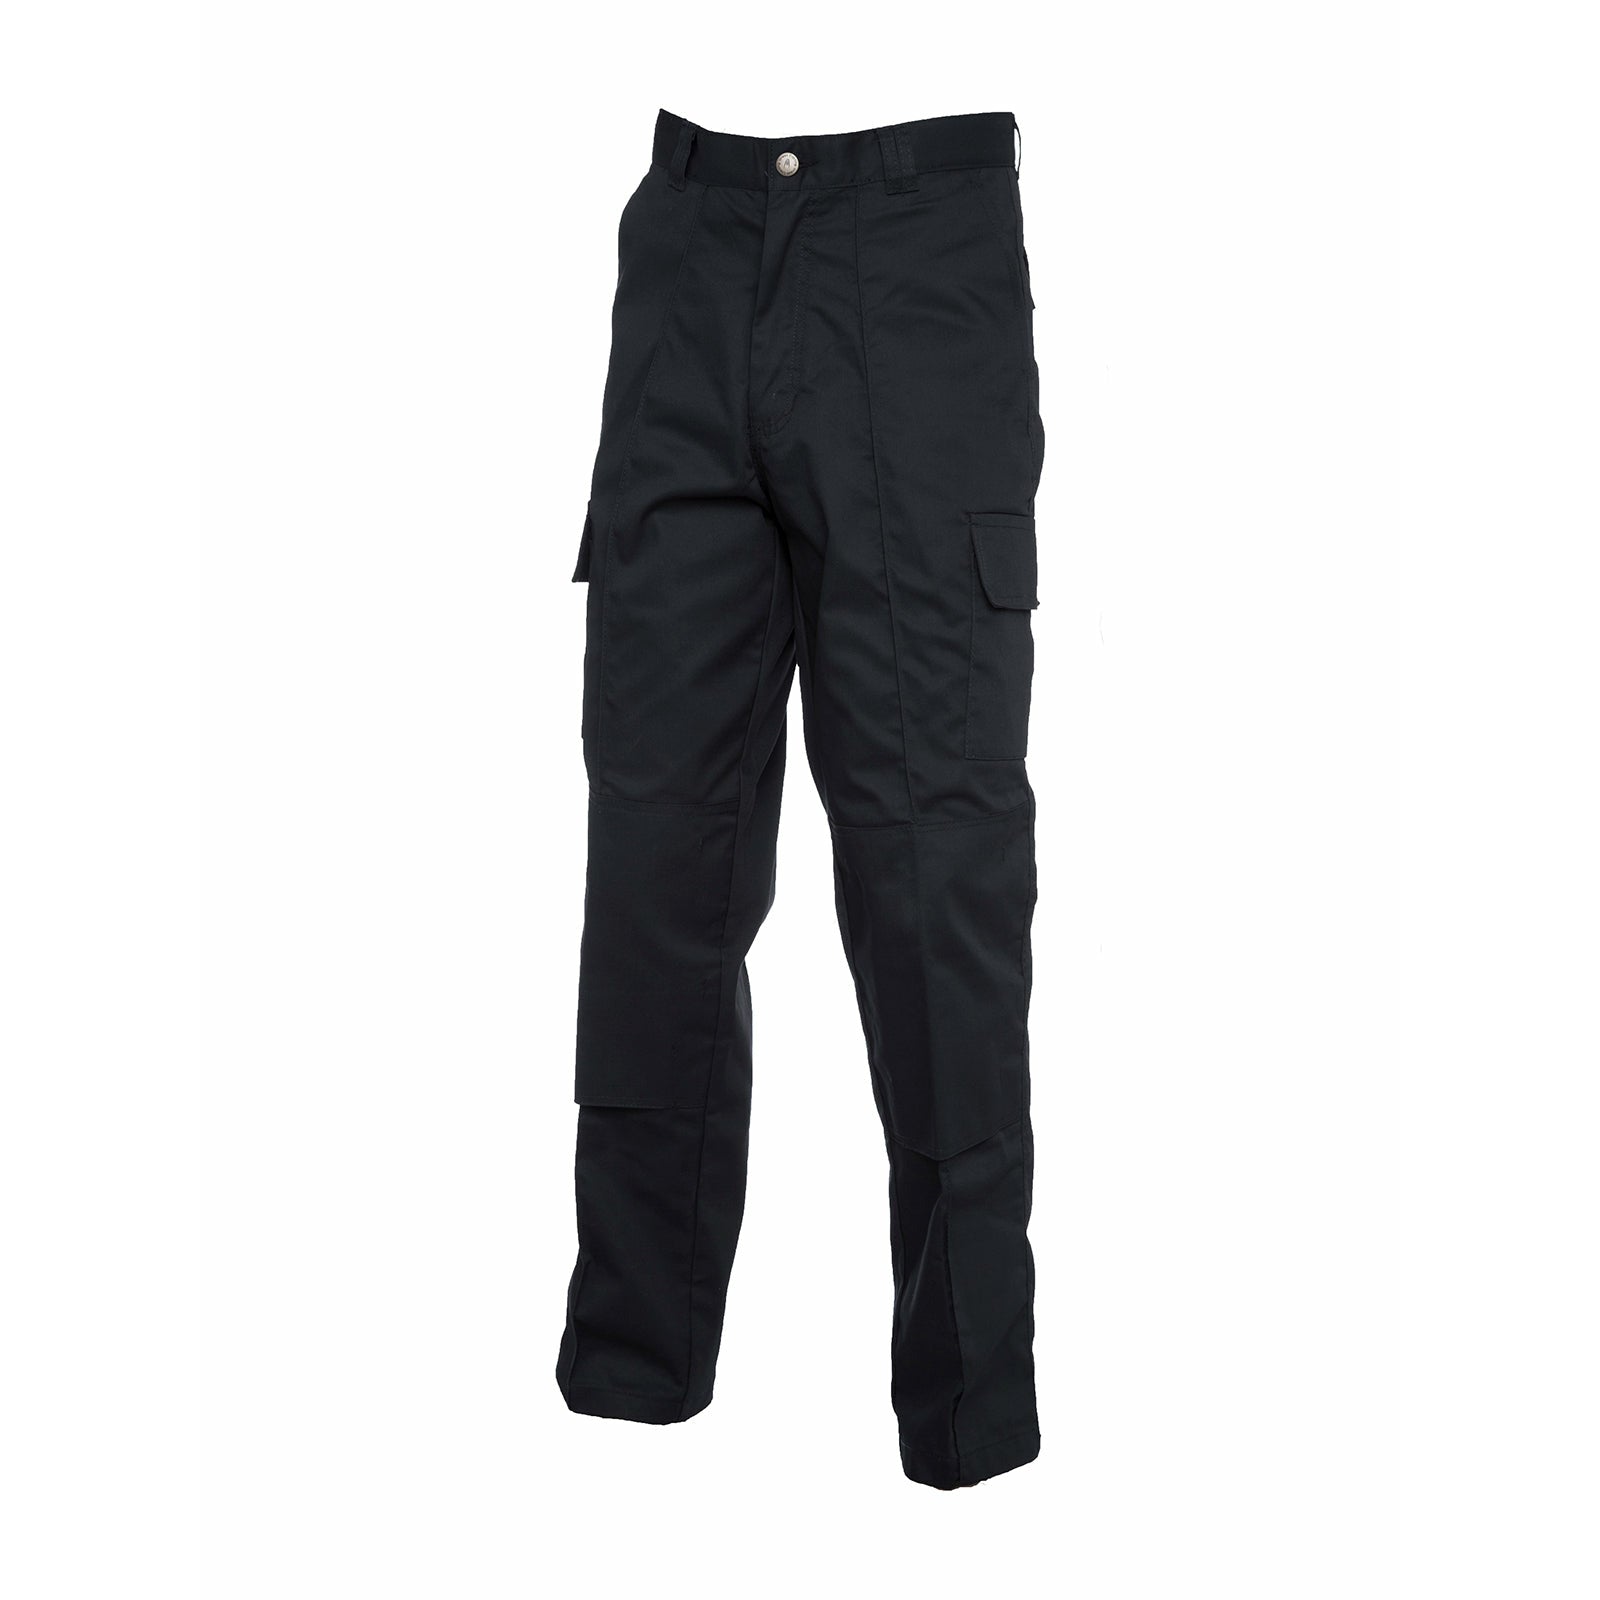 Cargo Trousers with Knee Pad Pockets Regular Black